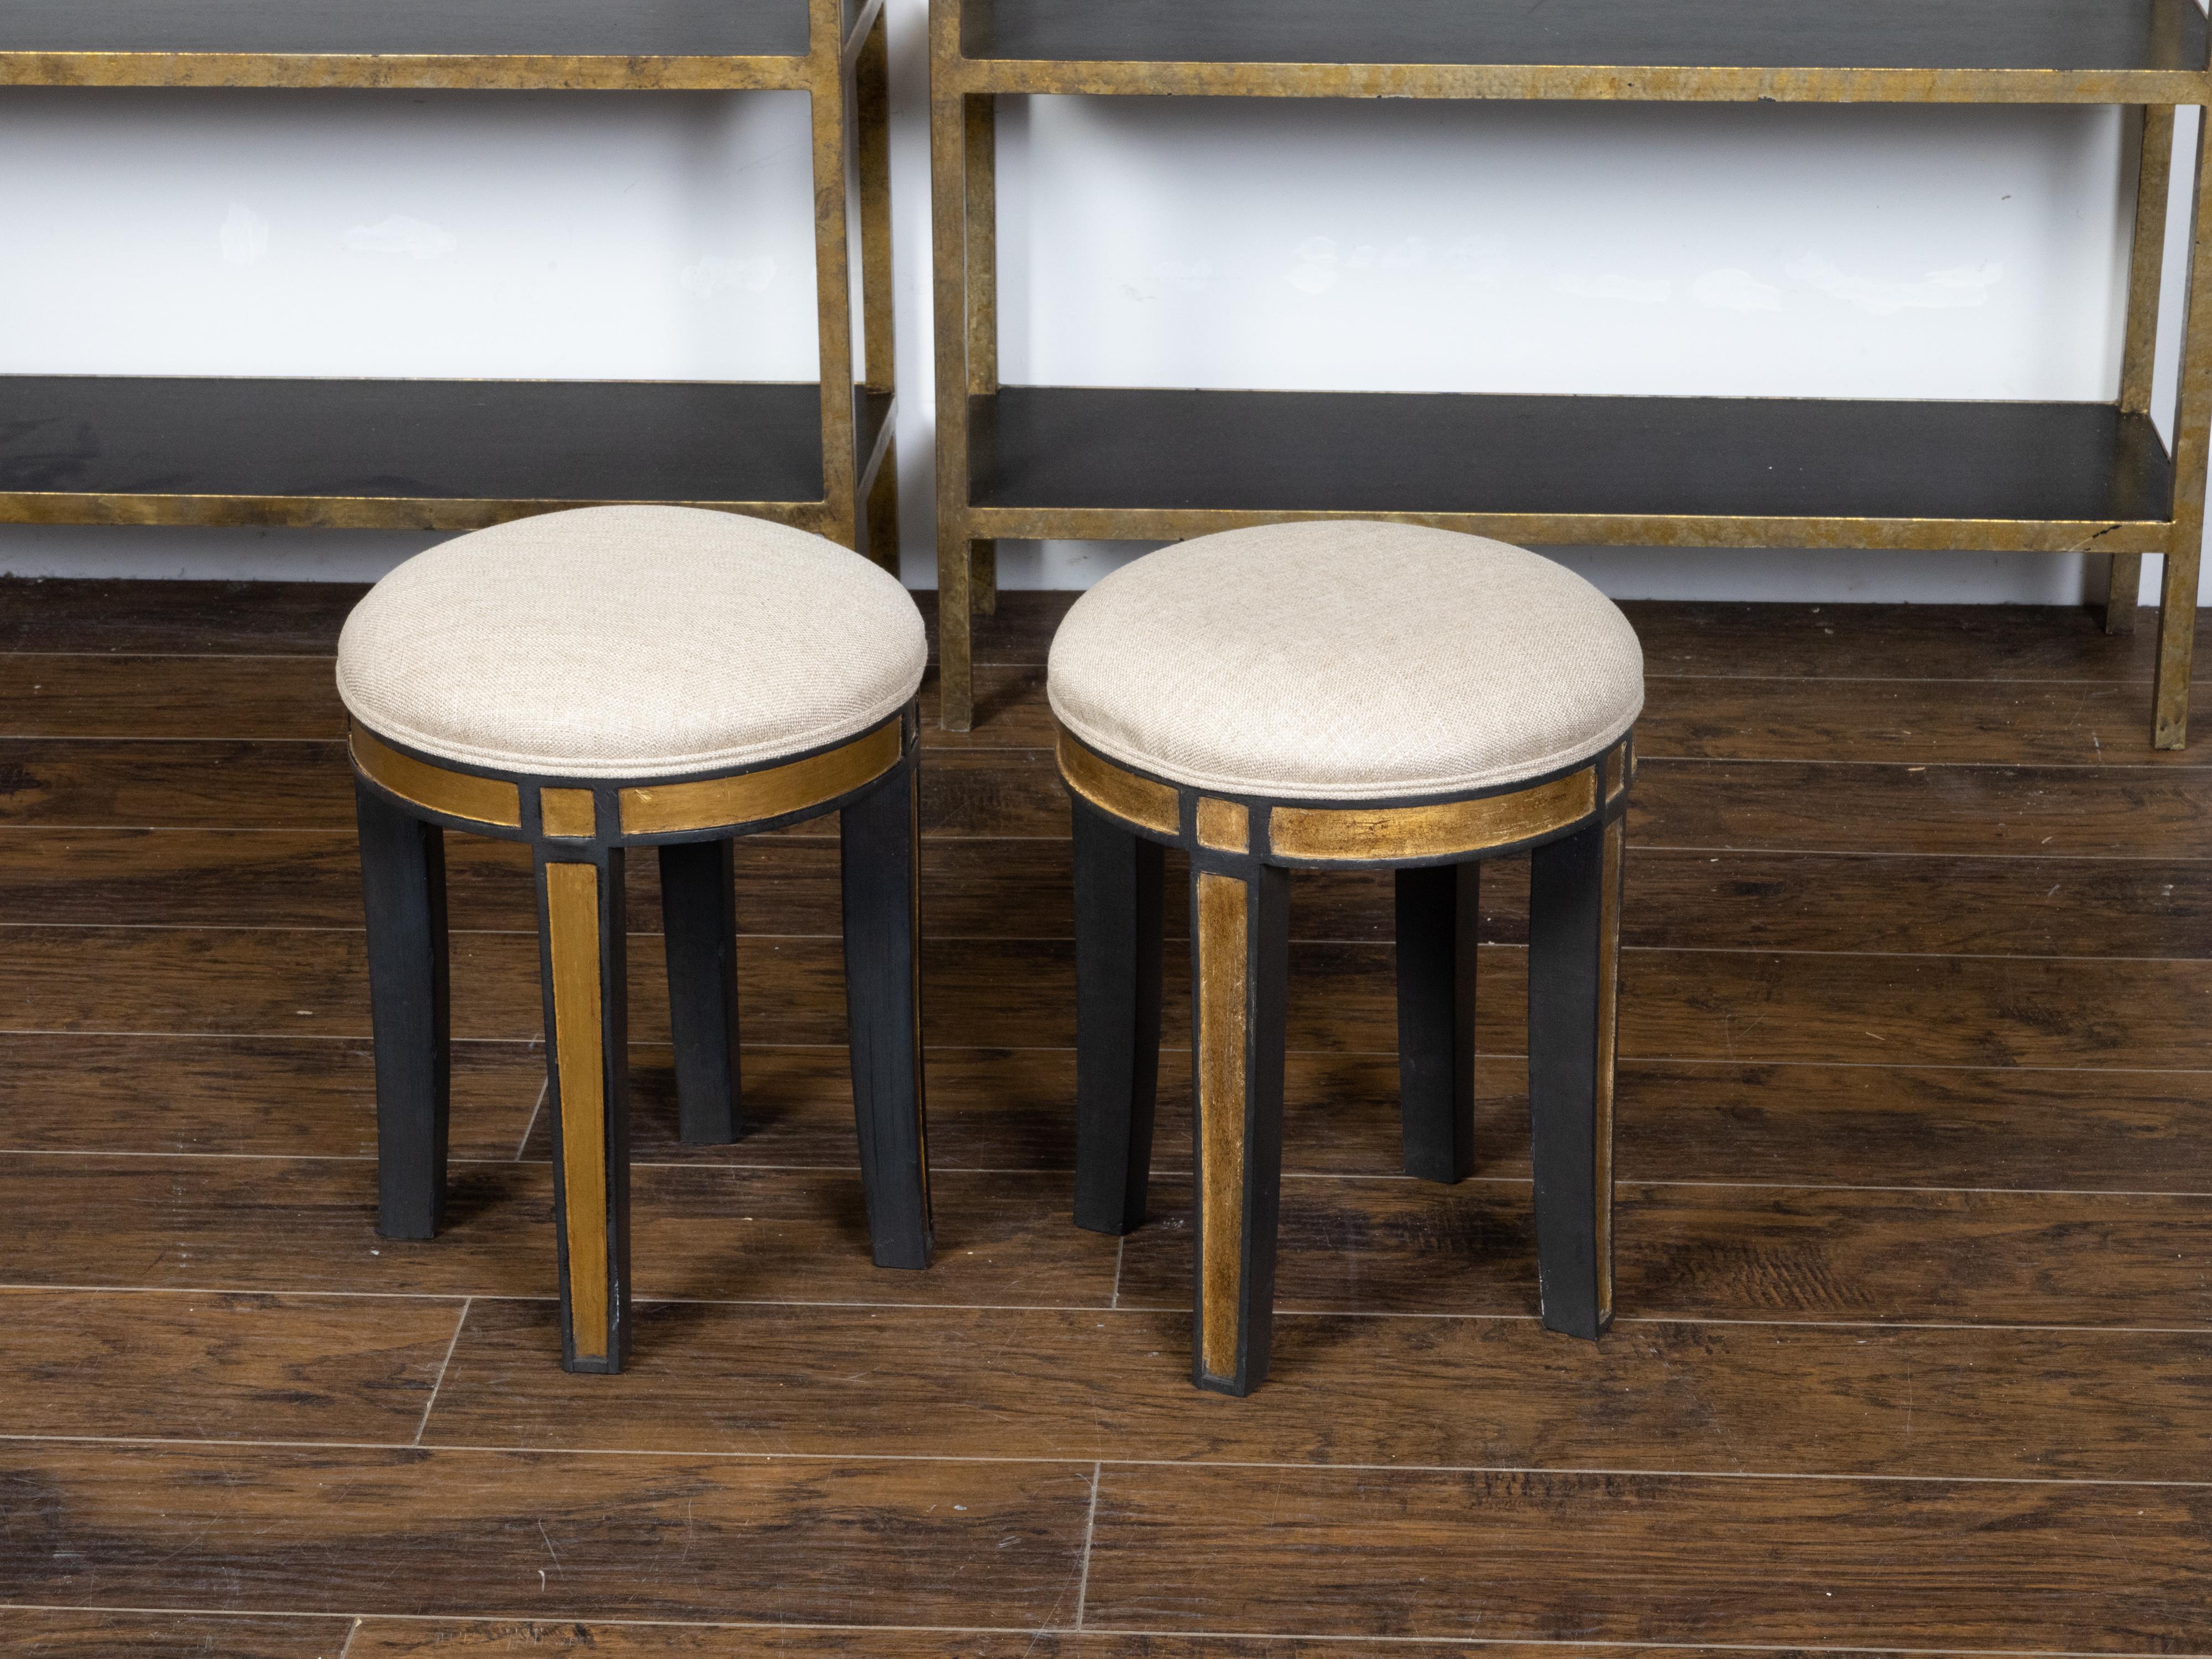 Pair of Midcentury Italian Upholstered Stools with Black and Gold Décor For Sale 1